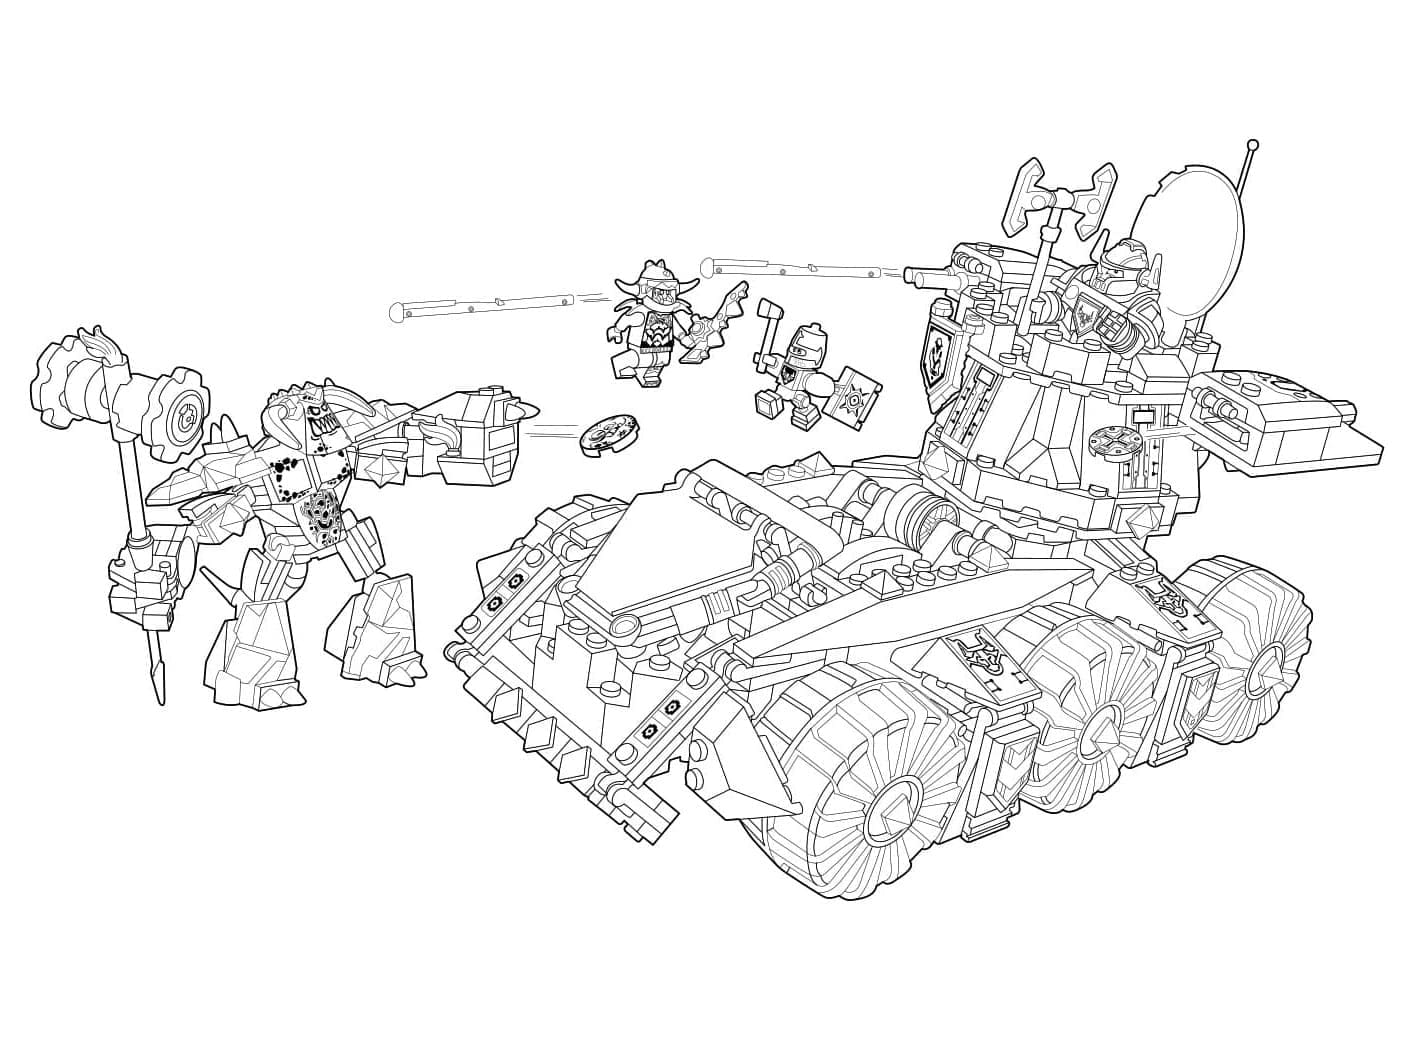 Lego Nexo Knights Free Printable coloring page - Download, Print or ...